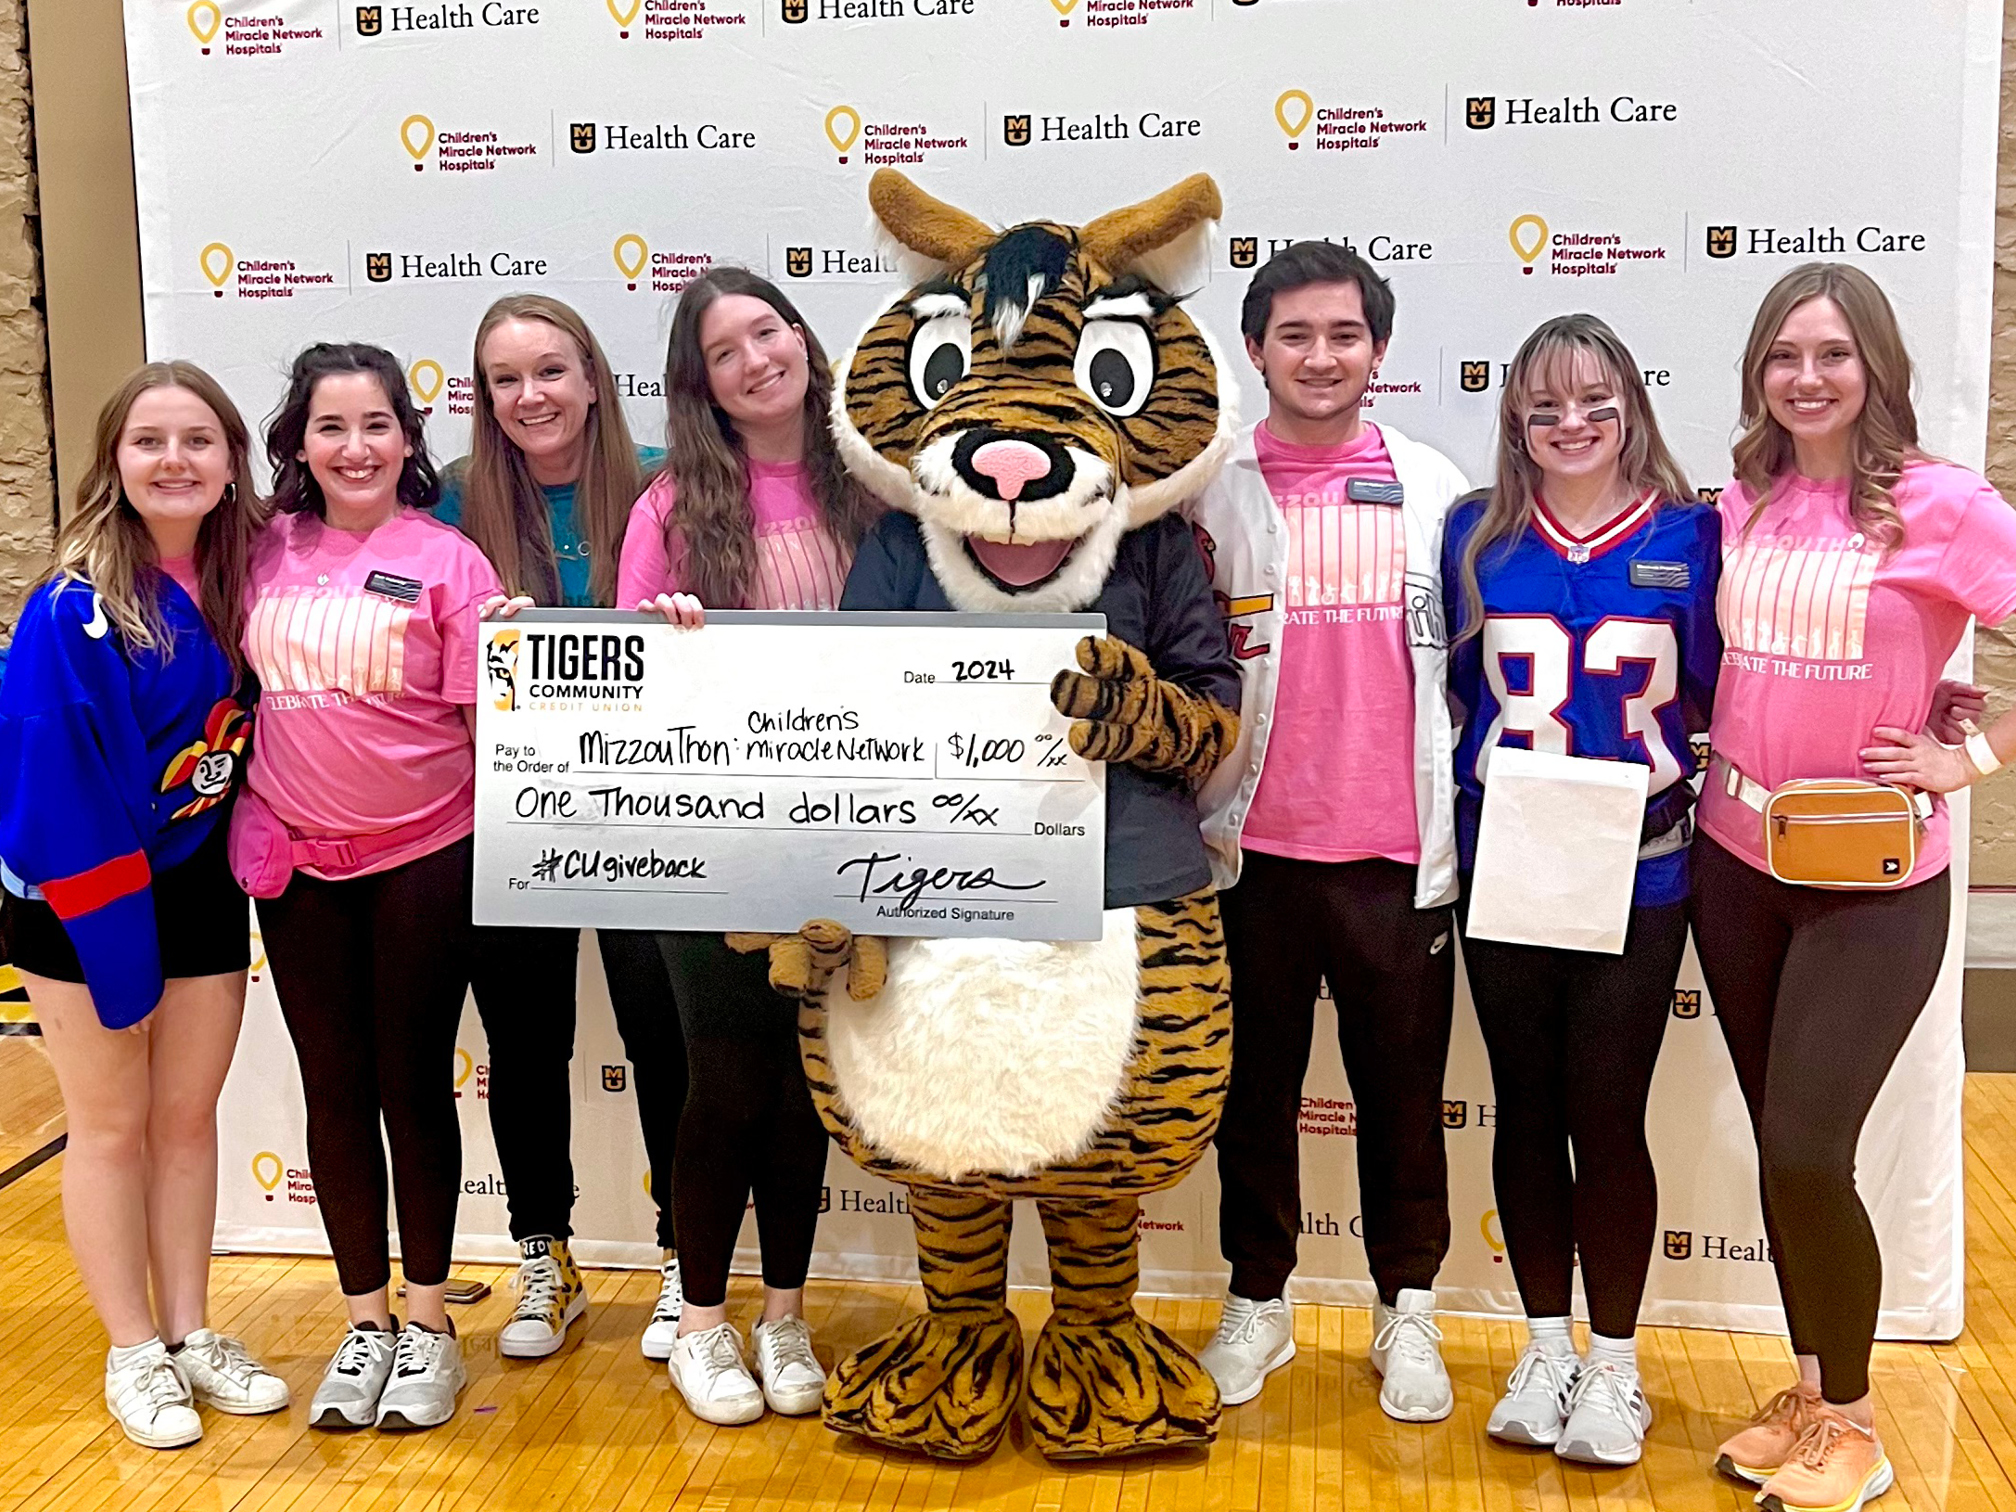 Tigers Community Credit Union's Tigersquirrel™ making a donation to Children's Miracle Network at Mizzouathon.